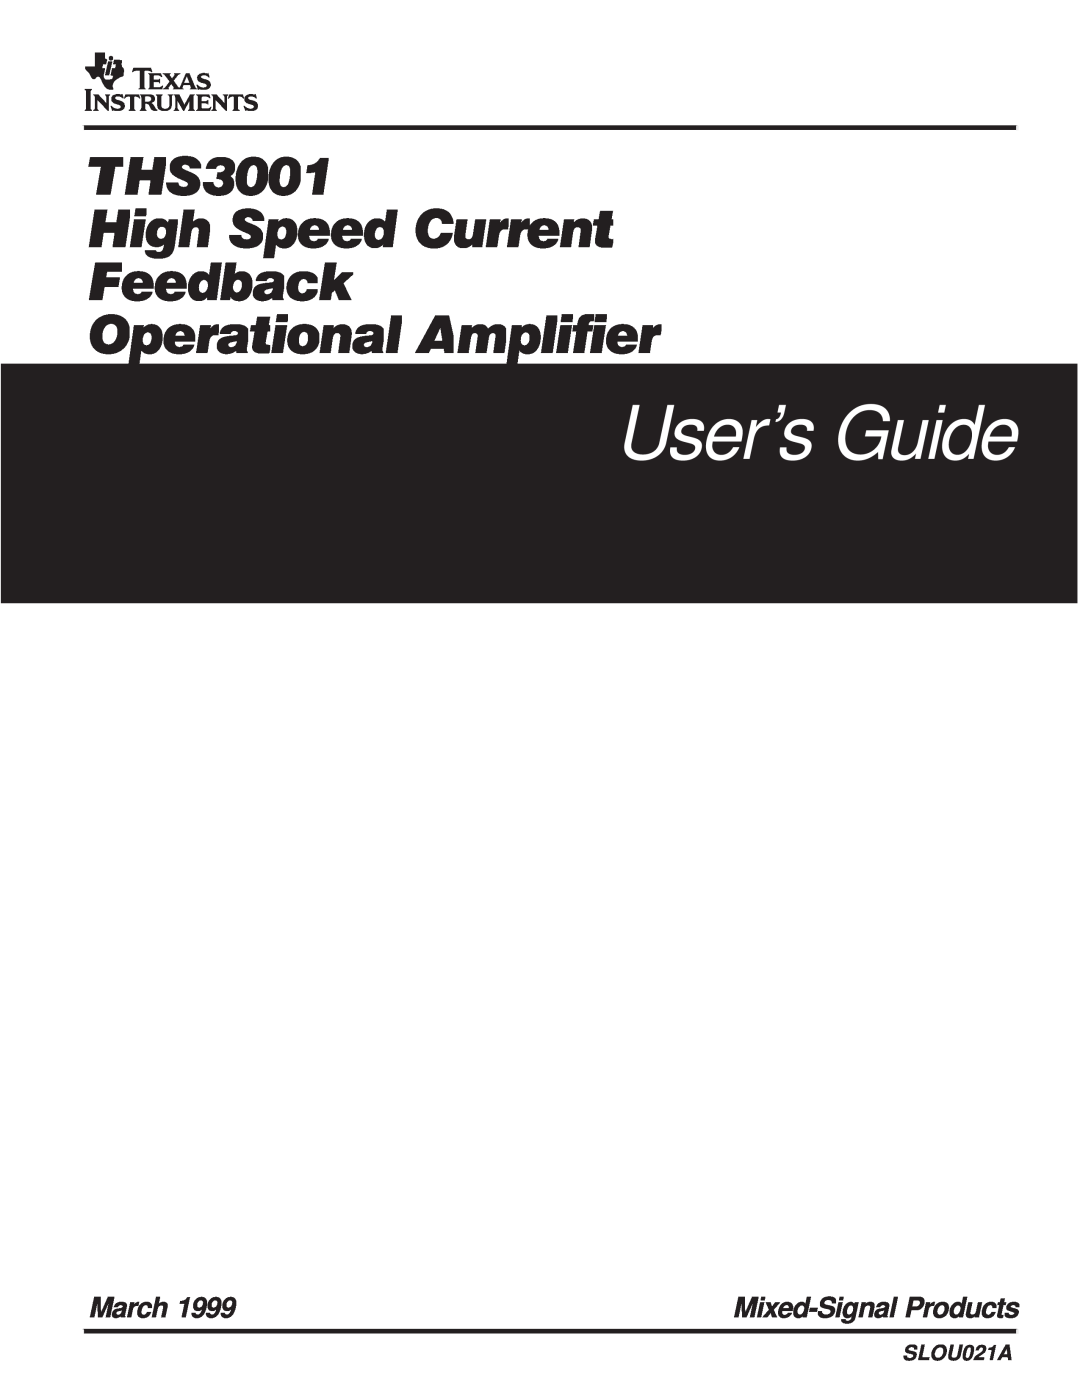 Texas Instruments manual Users Guide, THS3001 High Speed Current Feedback, Operational Amplifier, March, SLOU021A 